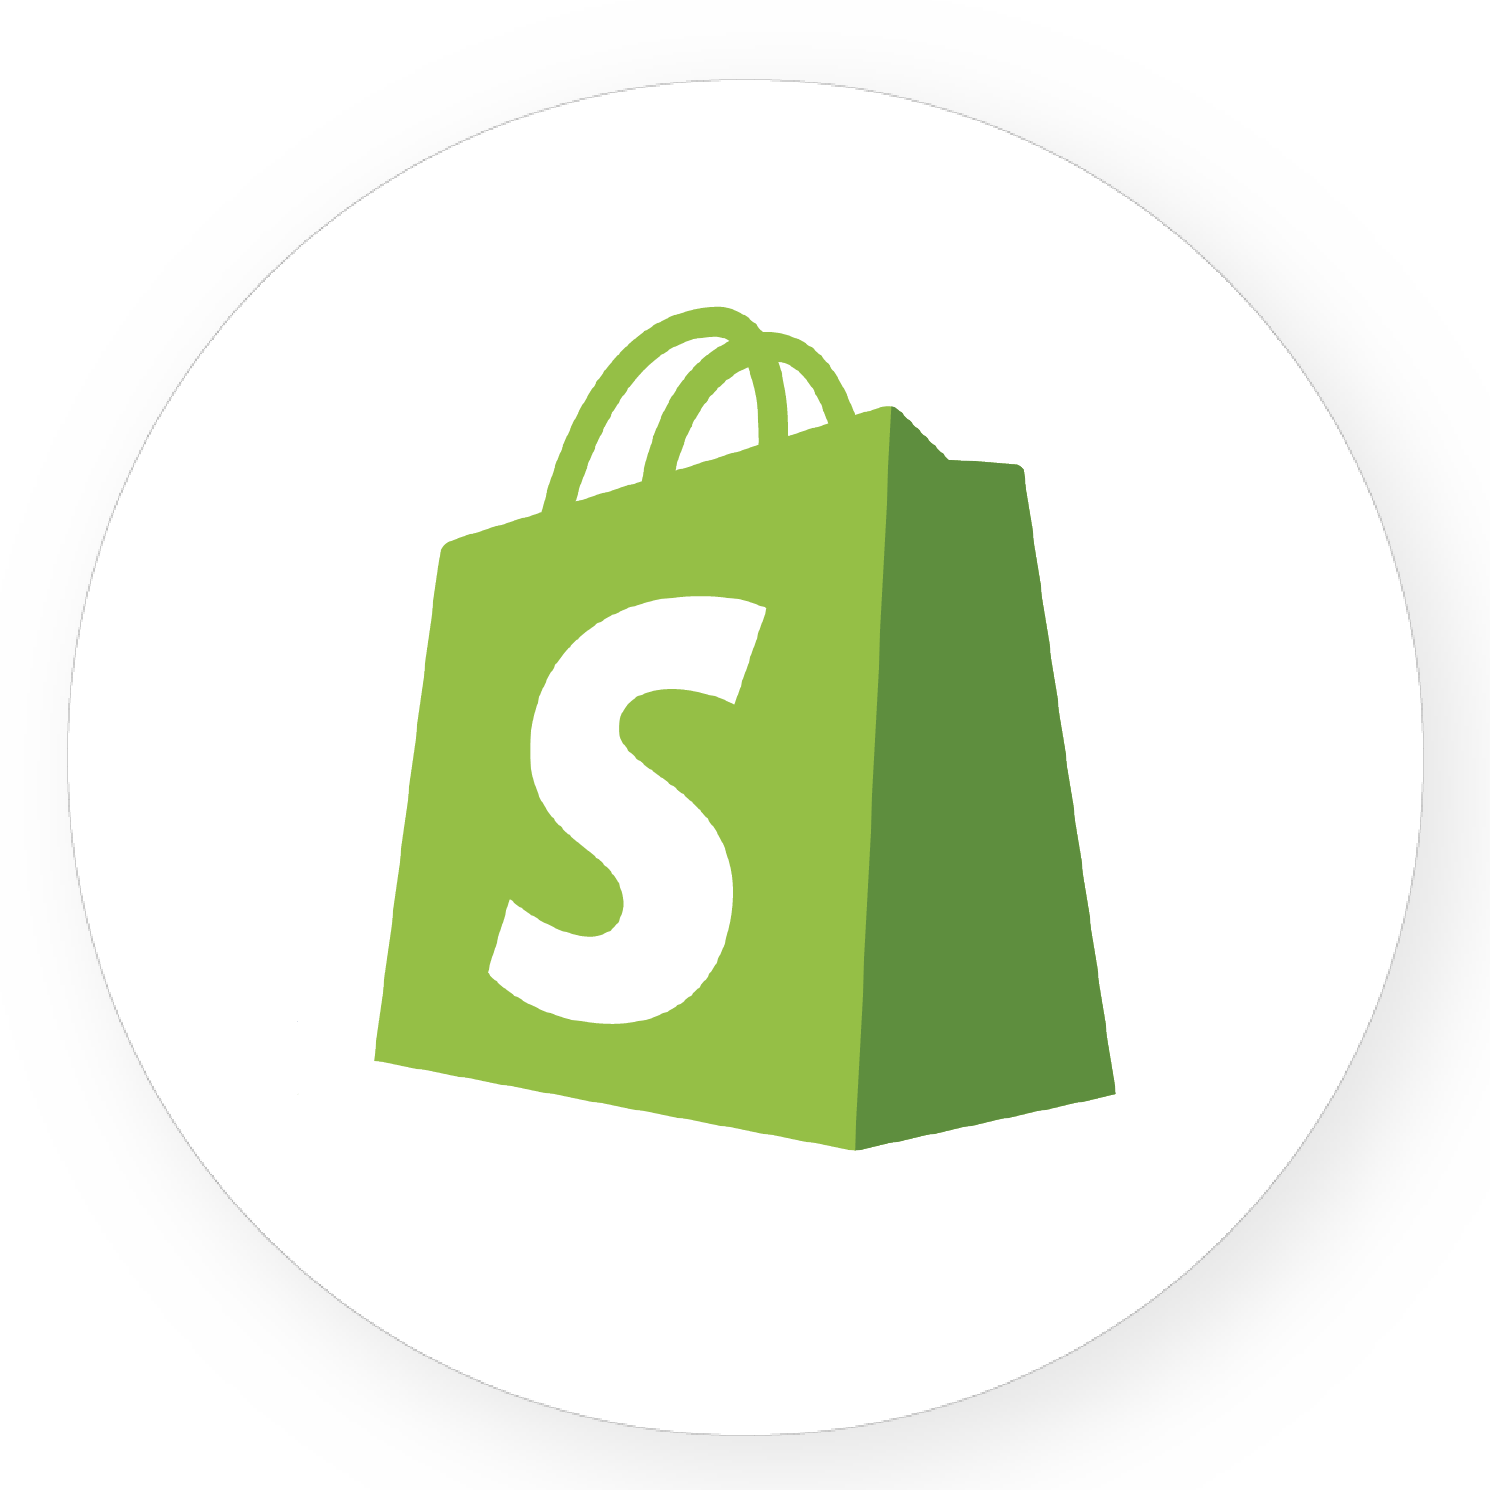 Shopify-01-1.png